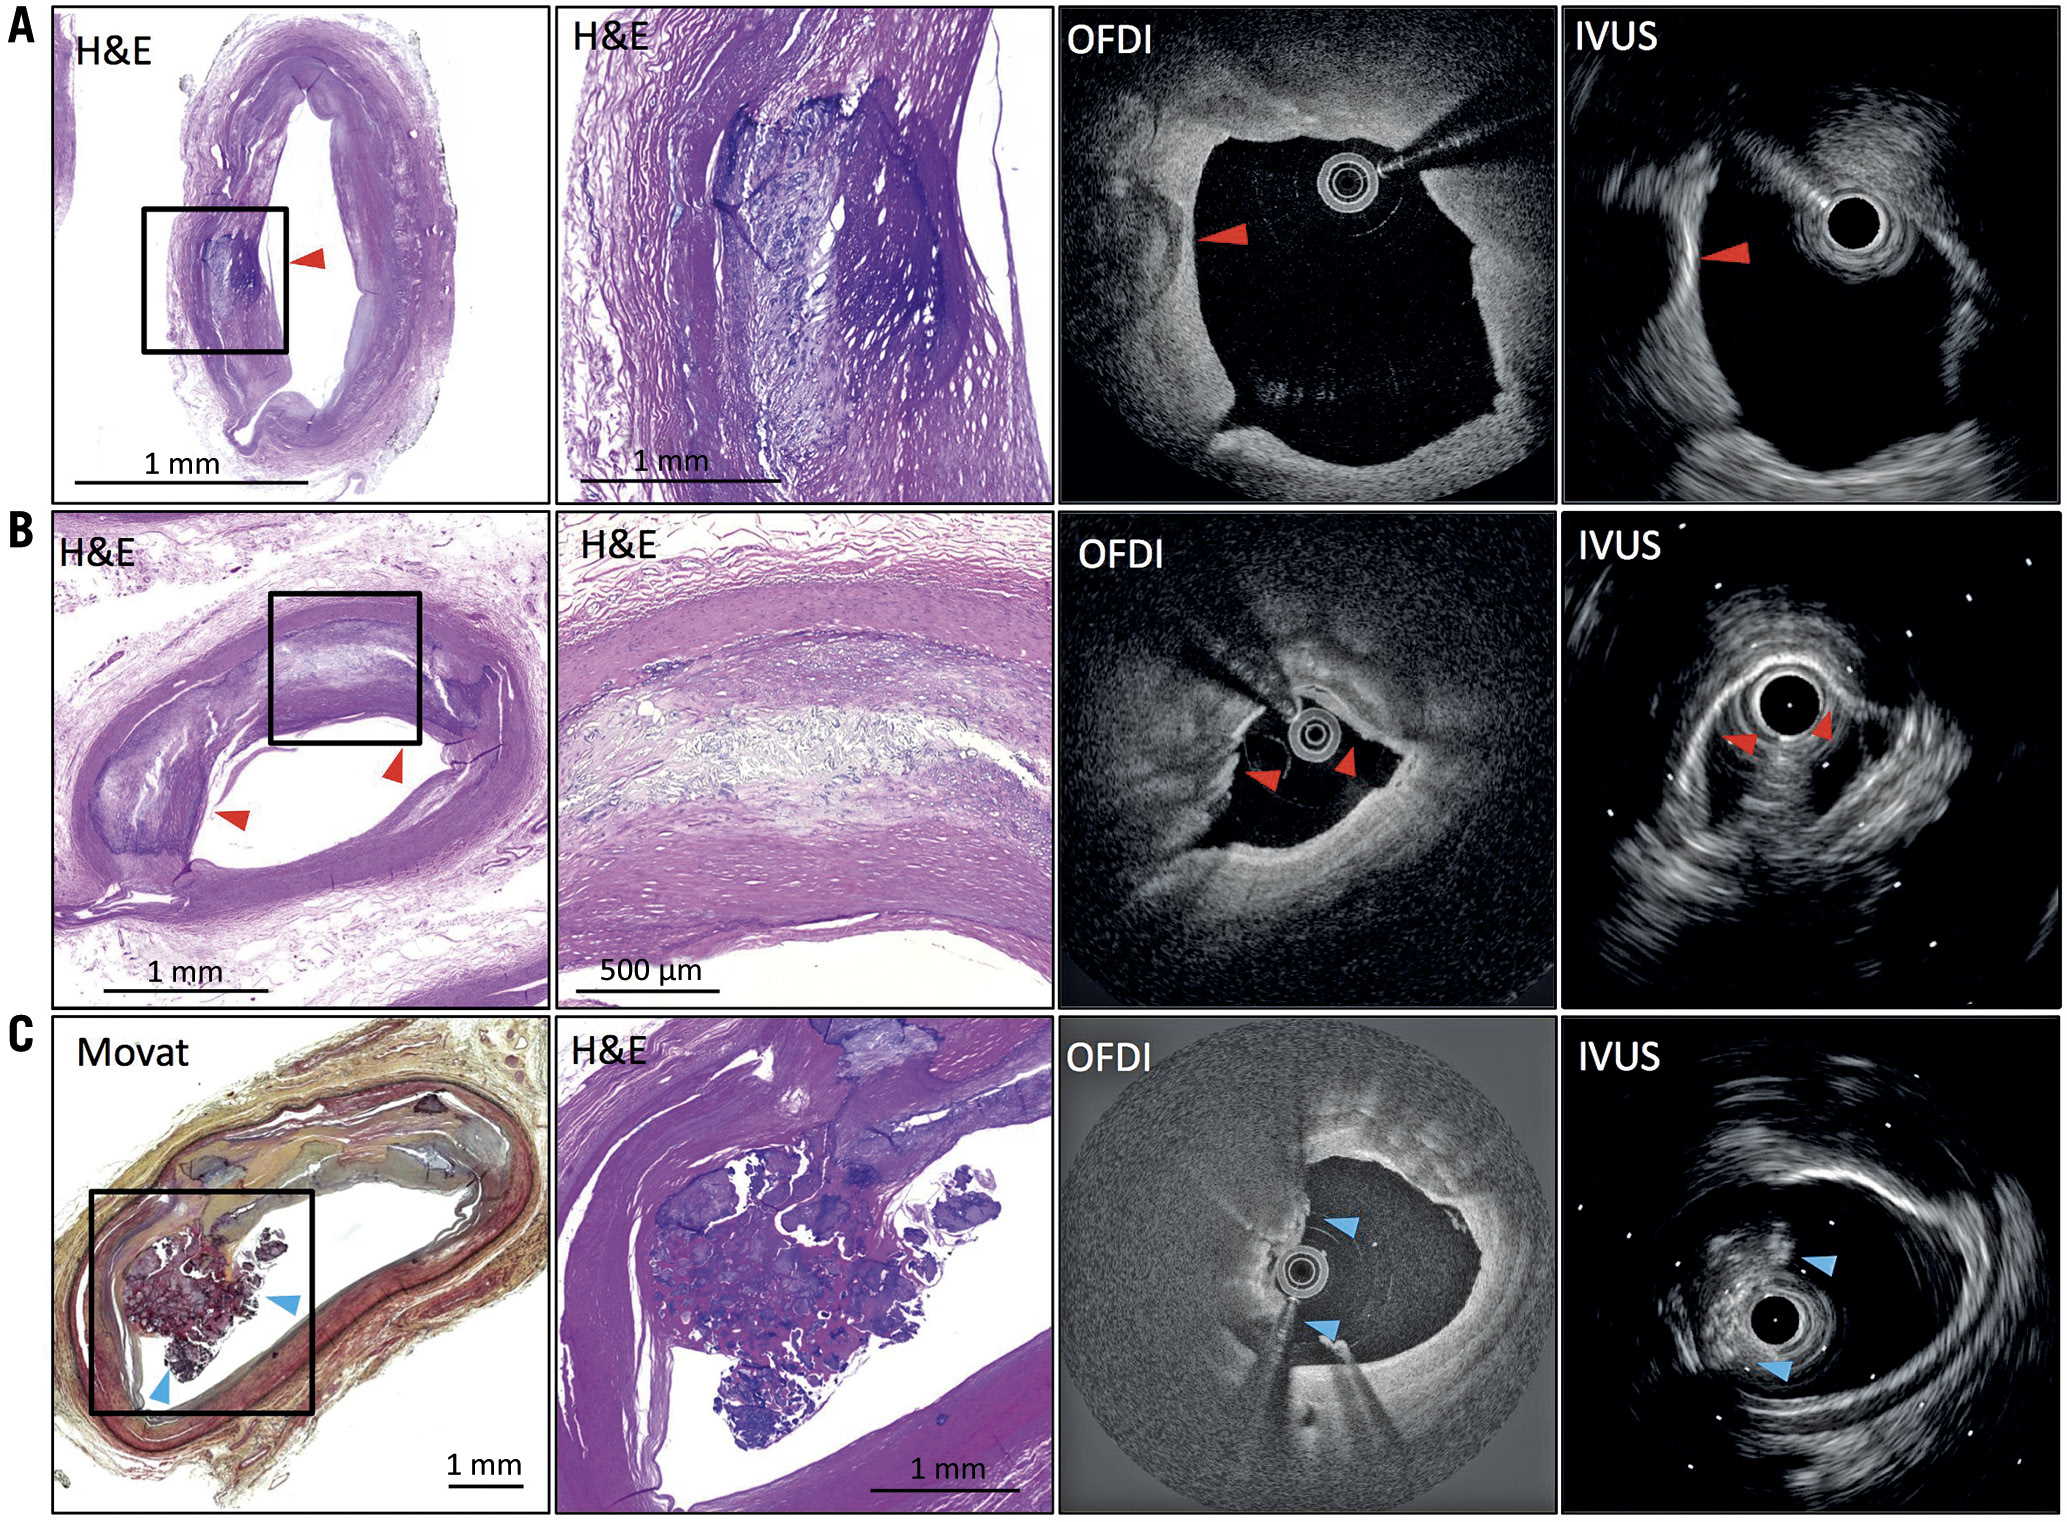 Figure 2. Representative images of intimal calcification by IVUS and OFDI co-registered with histology. A) Intimal fragmented calcification (red arrow). OFDI shows calcification with clear border only on the luminal side. IVUS shows high echoic signal with a strong acoustic shadow. B) A histological section shows superficial intimal calcification (red arrows). OFDI shows a clear border between intima and calcification; however, the abluminal edge of calcification is not visible due to its deep location. IVUS shows high echoic signal with a strong acoustic shadow derived from the presence of calcification. C) Intimal calcified nodule (blue arrows). There is no endothelium and collagen on the surface of the nodules. OFDI shows irregular protruded mass with attenuation signal in contact with large calcification. IVUS shows protruded and irregular mass with high acoustic shadow. IVUS: intravascular ultrasound; OFDI: optical frequency domain imaging